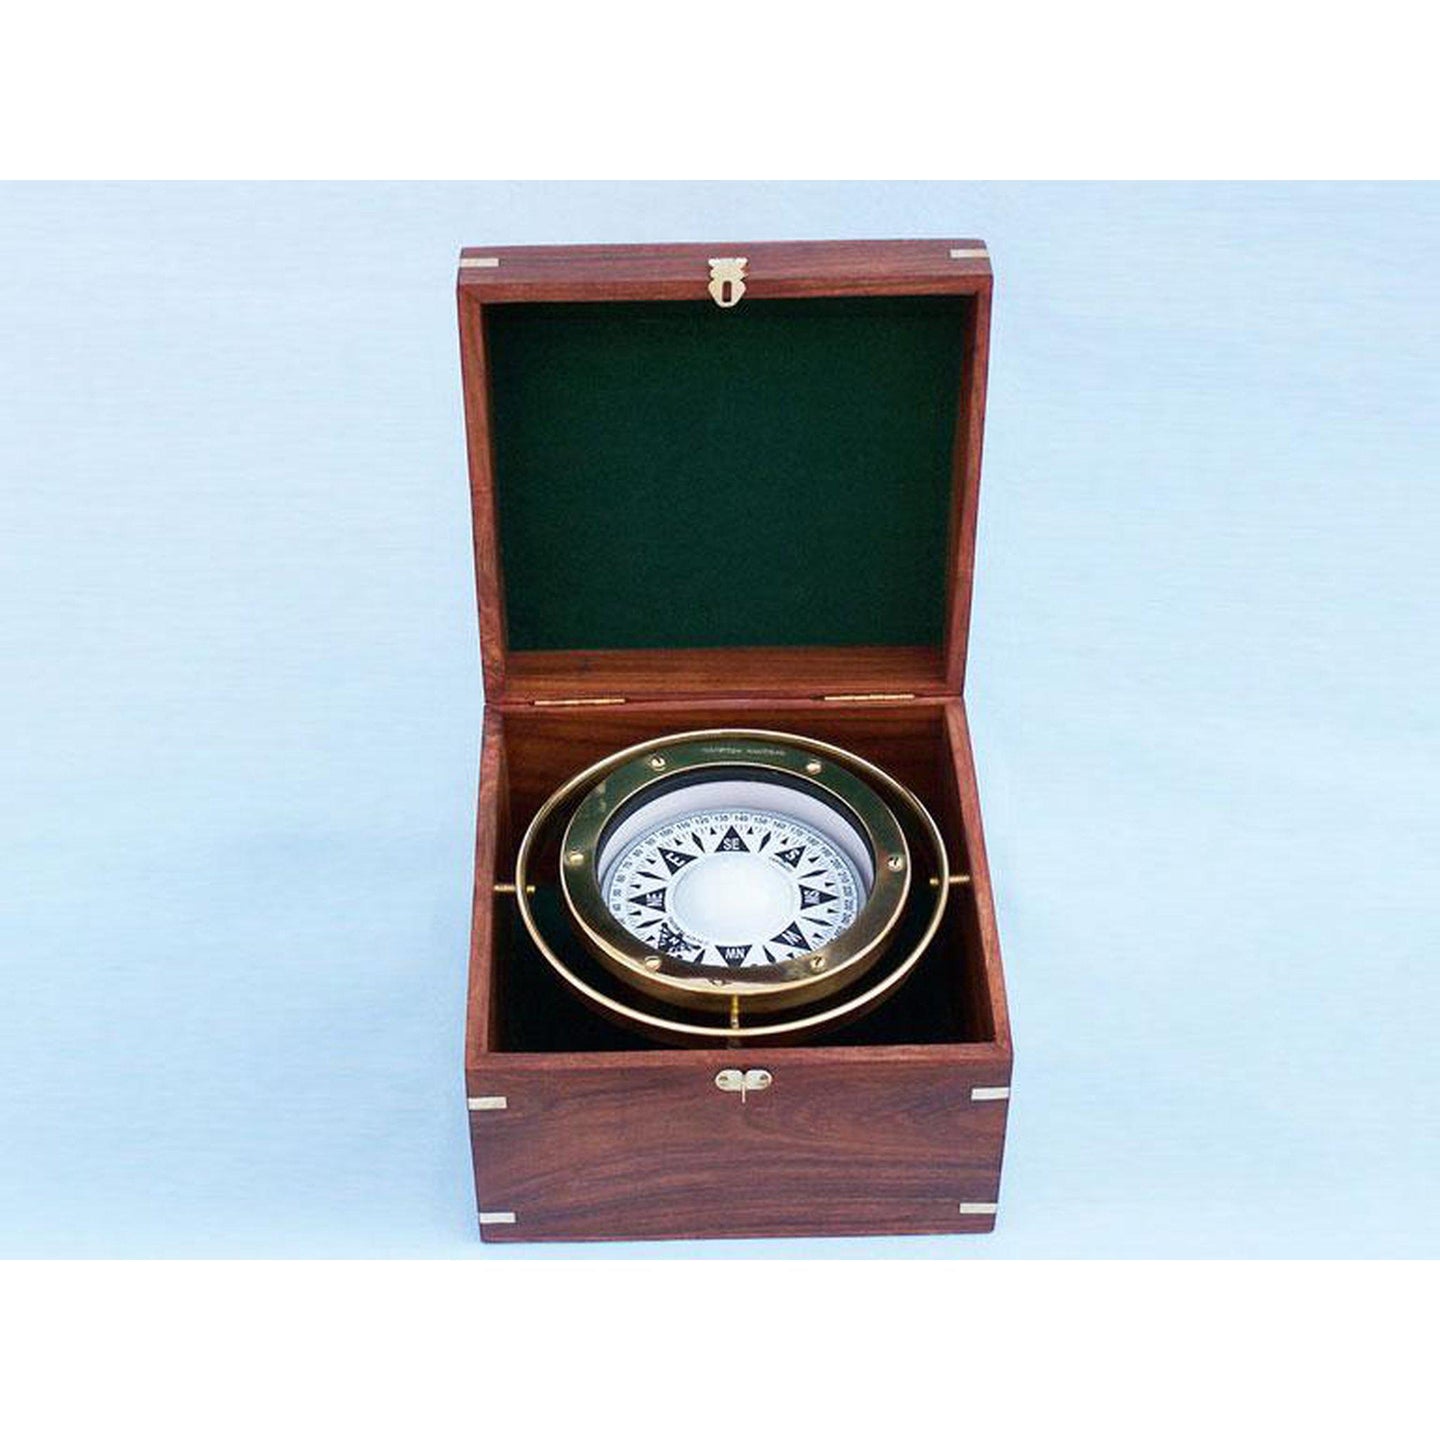 Handcrafted Model Ships Antique Brass Gimbal Compass w/ Rosewood Box 9